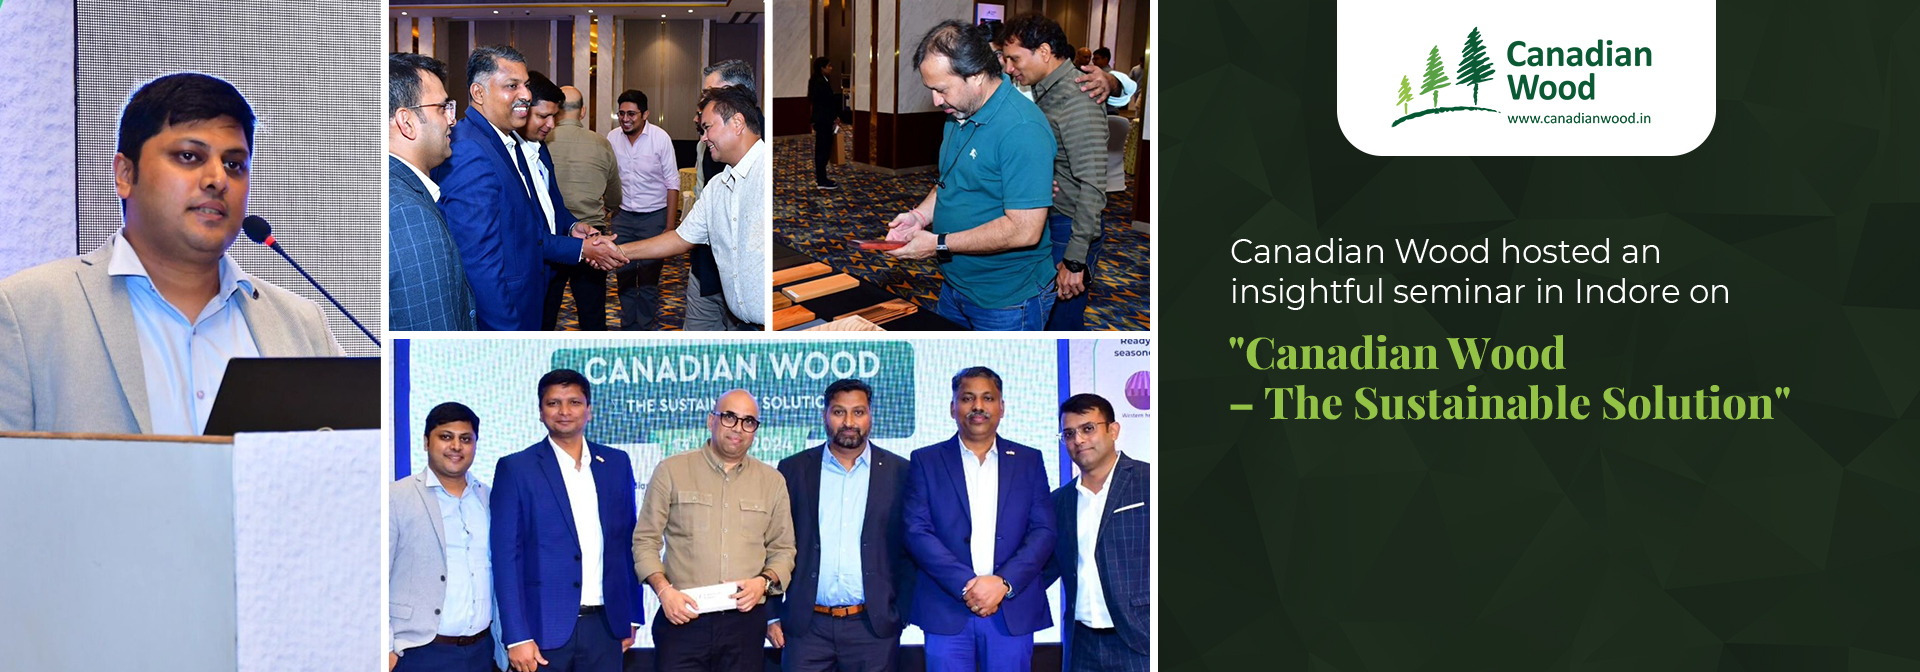 Canadian Wood hosted an insightful seminar in Indore on